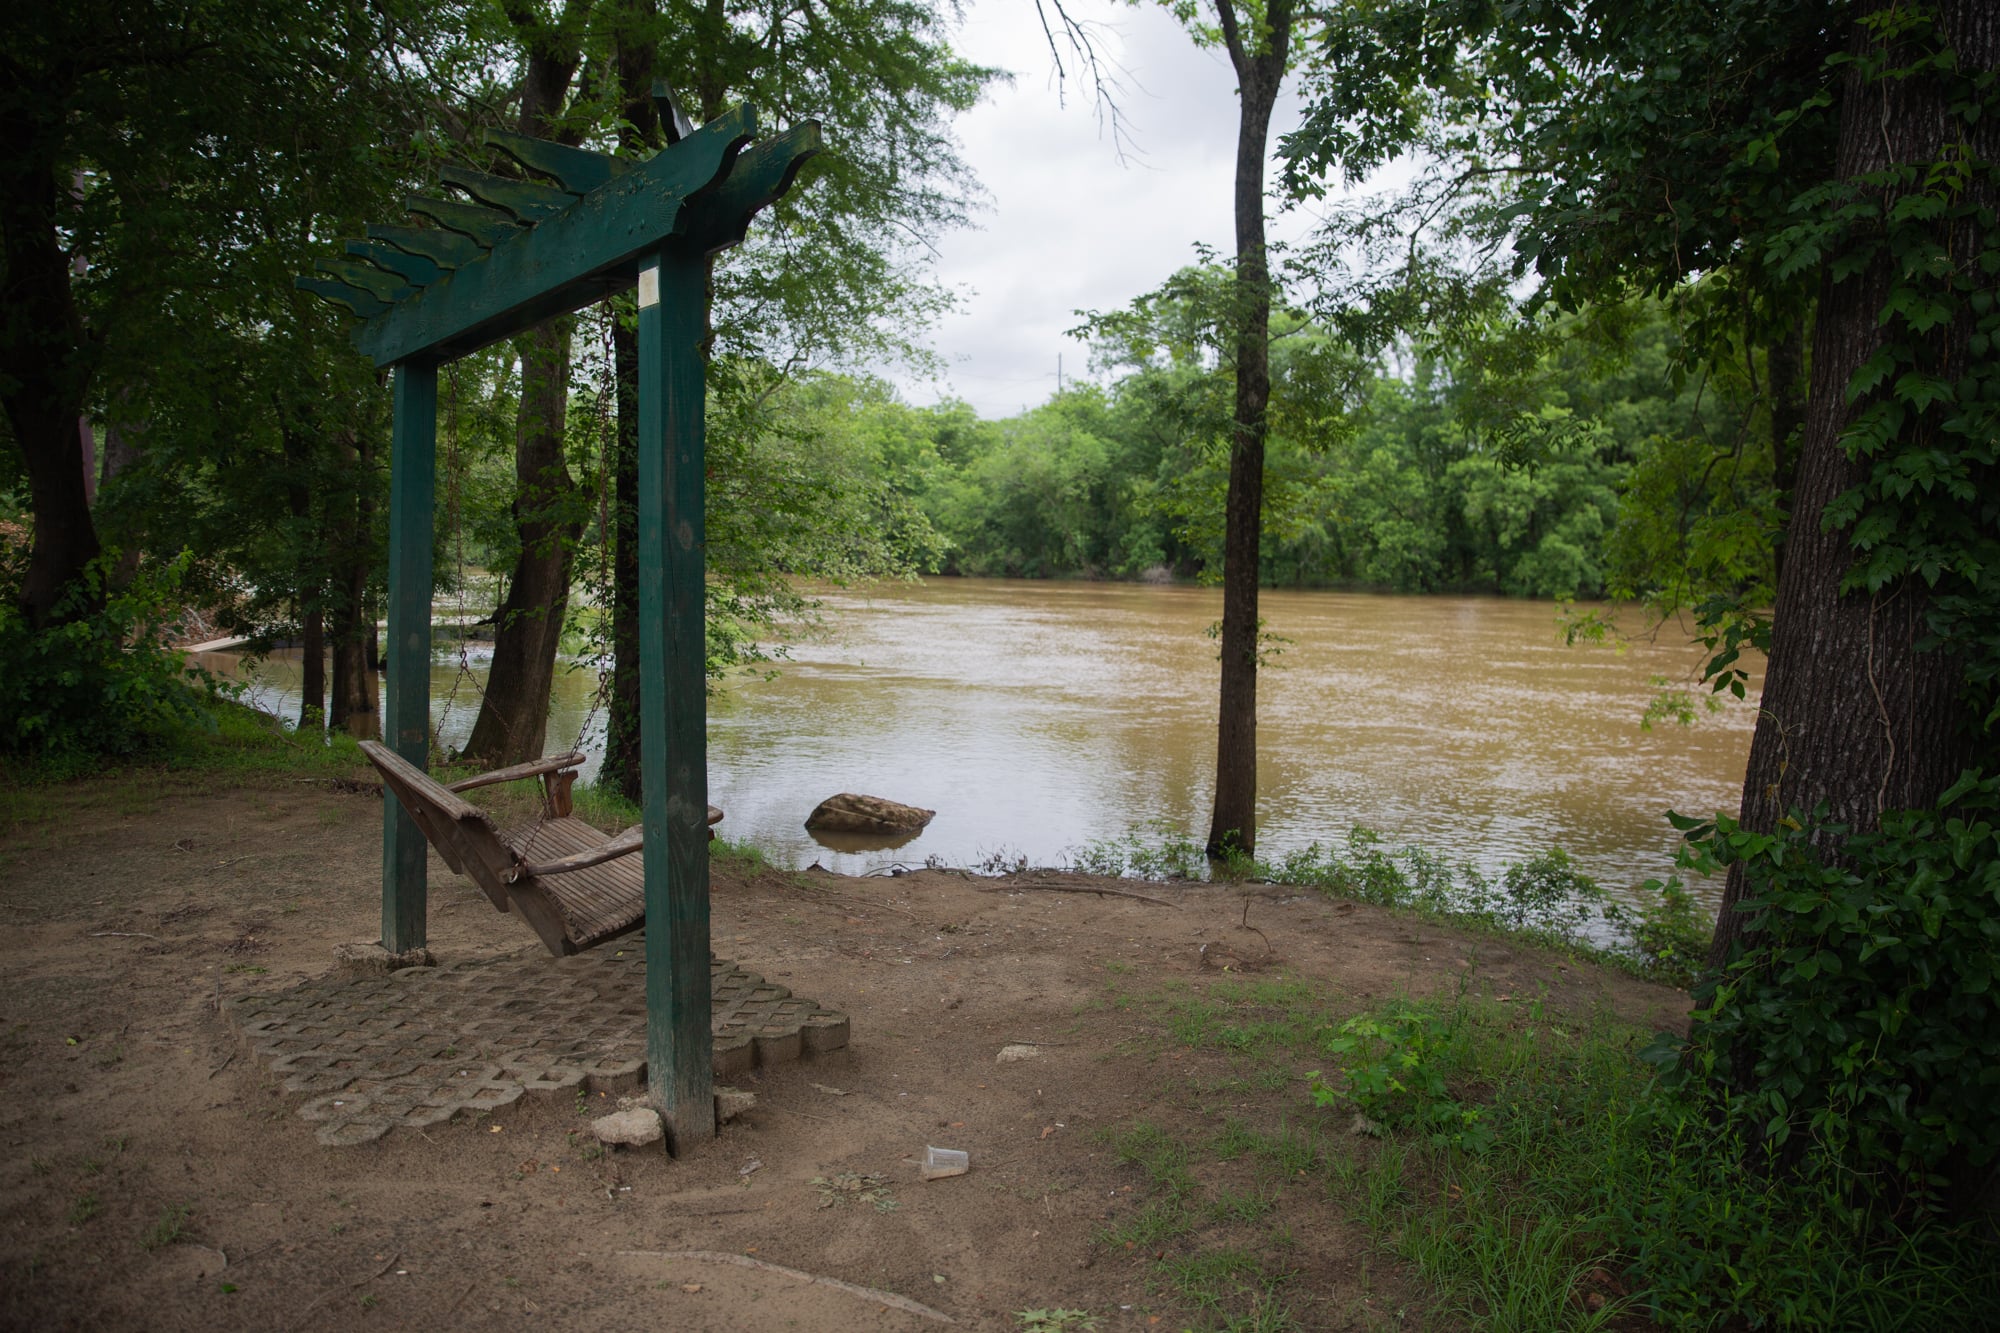 The Neuse River running through Kinston, North Carolina, regularly overflows during severe storms. After Hurricanes Matthew and Florence, Kinston was hit with a second wave when dams near Raleigh released more water into the river. (Harrison Mantas/News21)